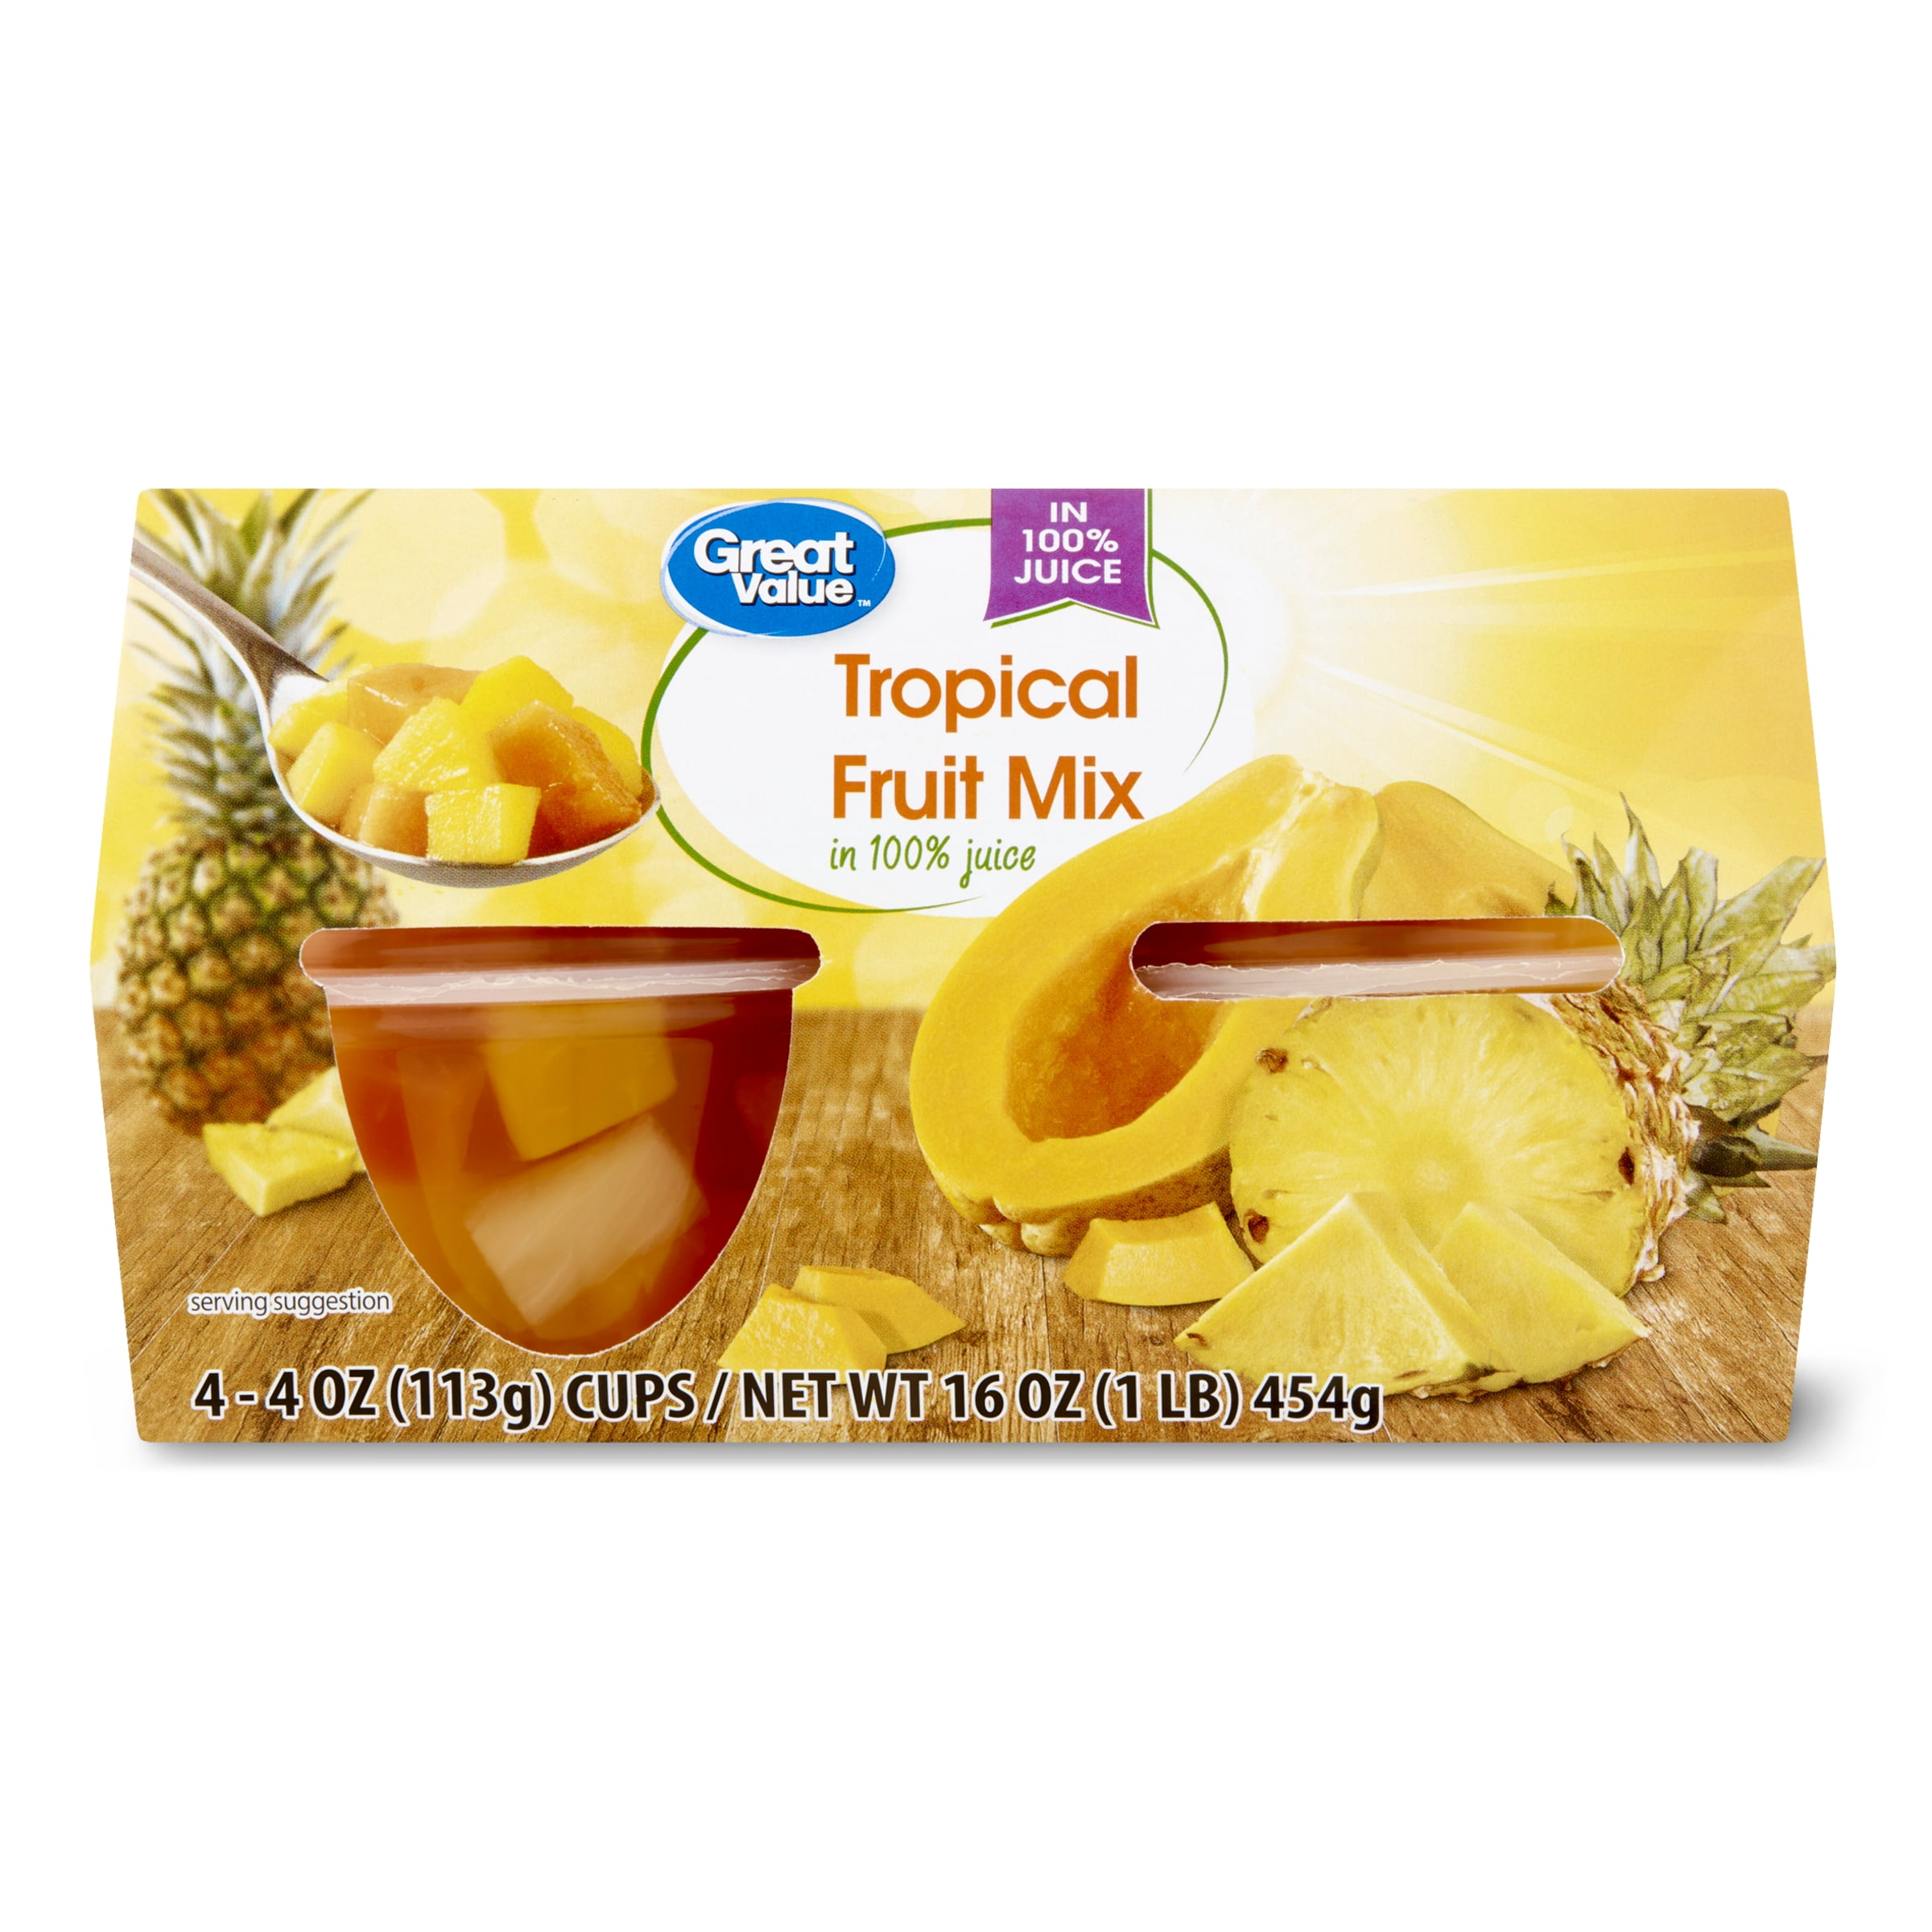 Great Value Tropical Fruit Mix in 100% Juice, 4 oz, 4 Cups